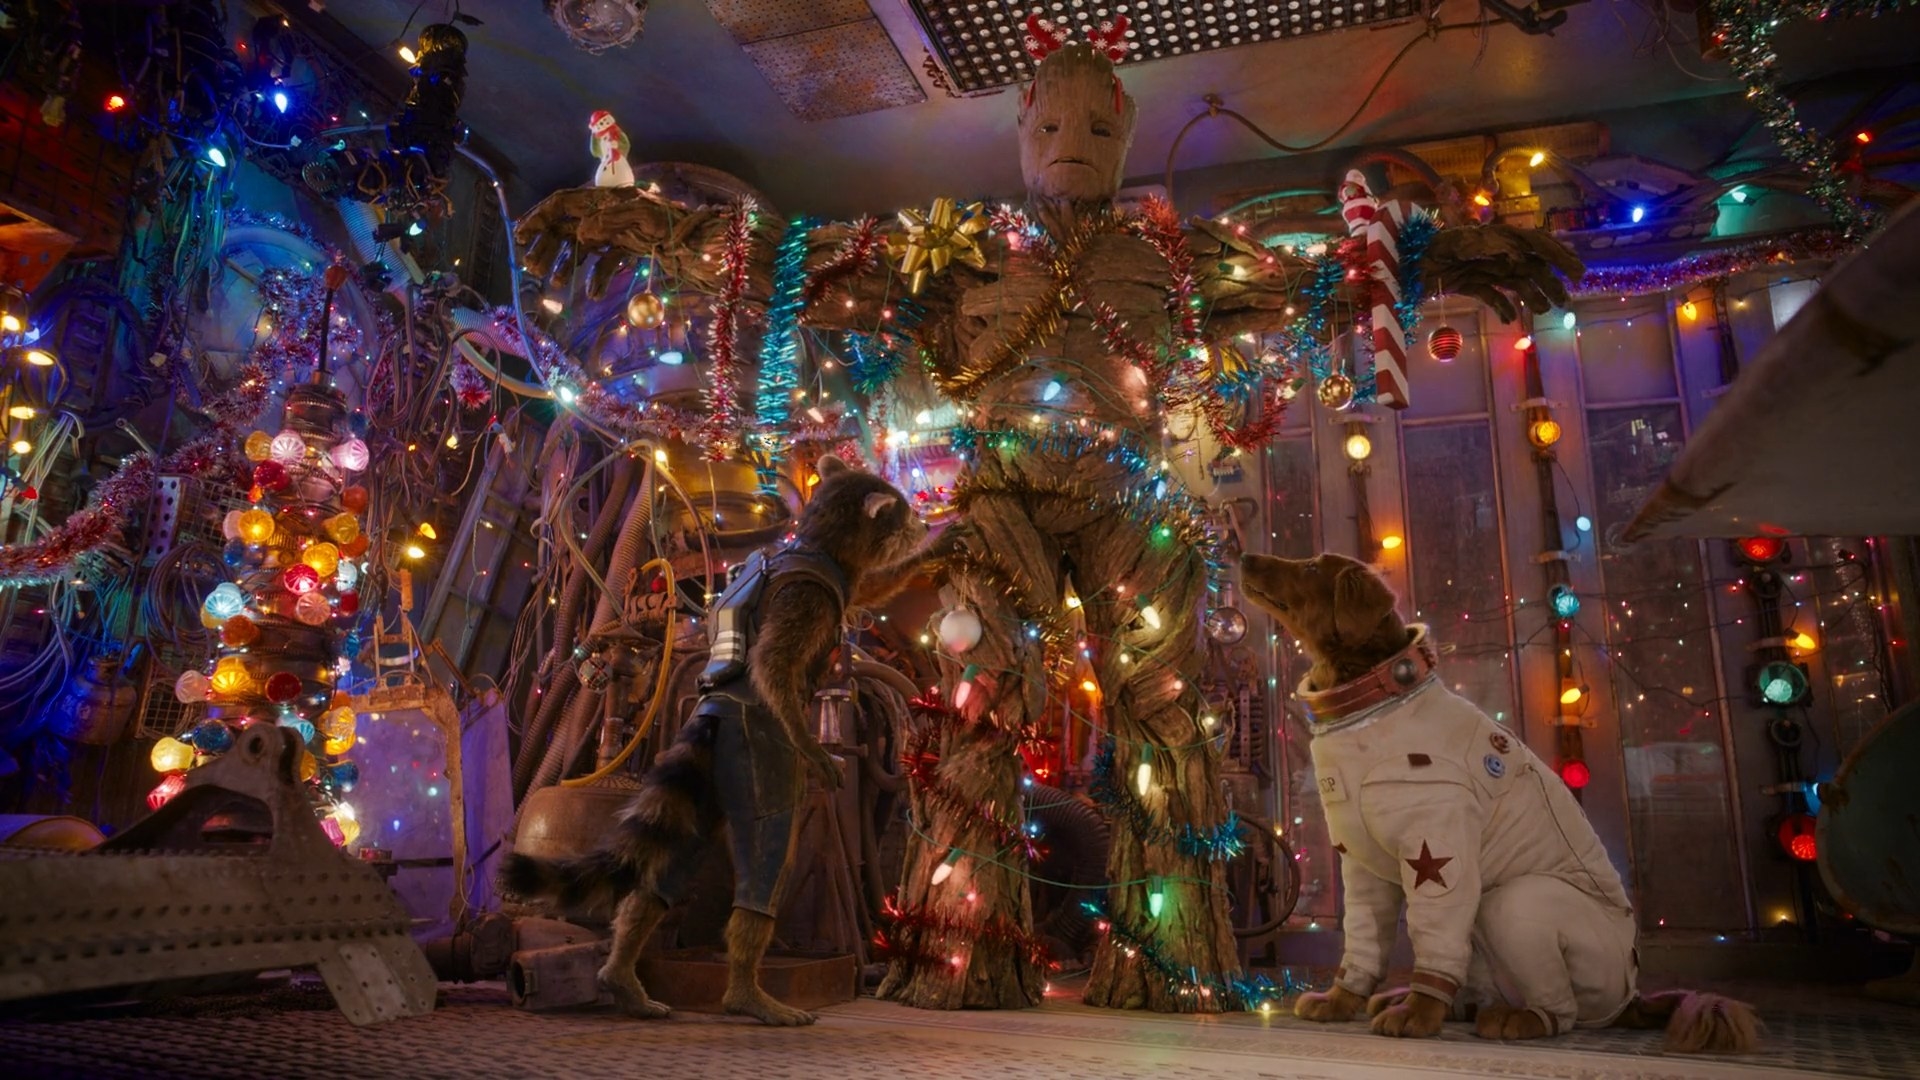 Rocket and Cosmo hang Christmas decorations from Groot